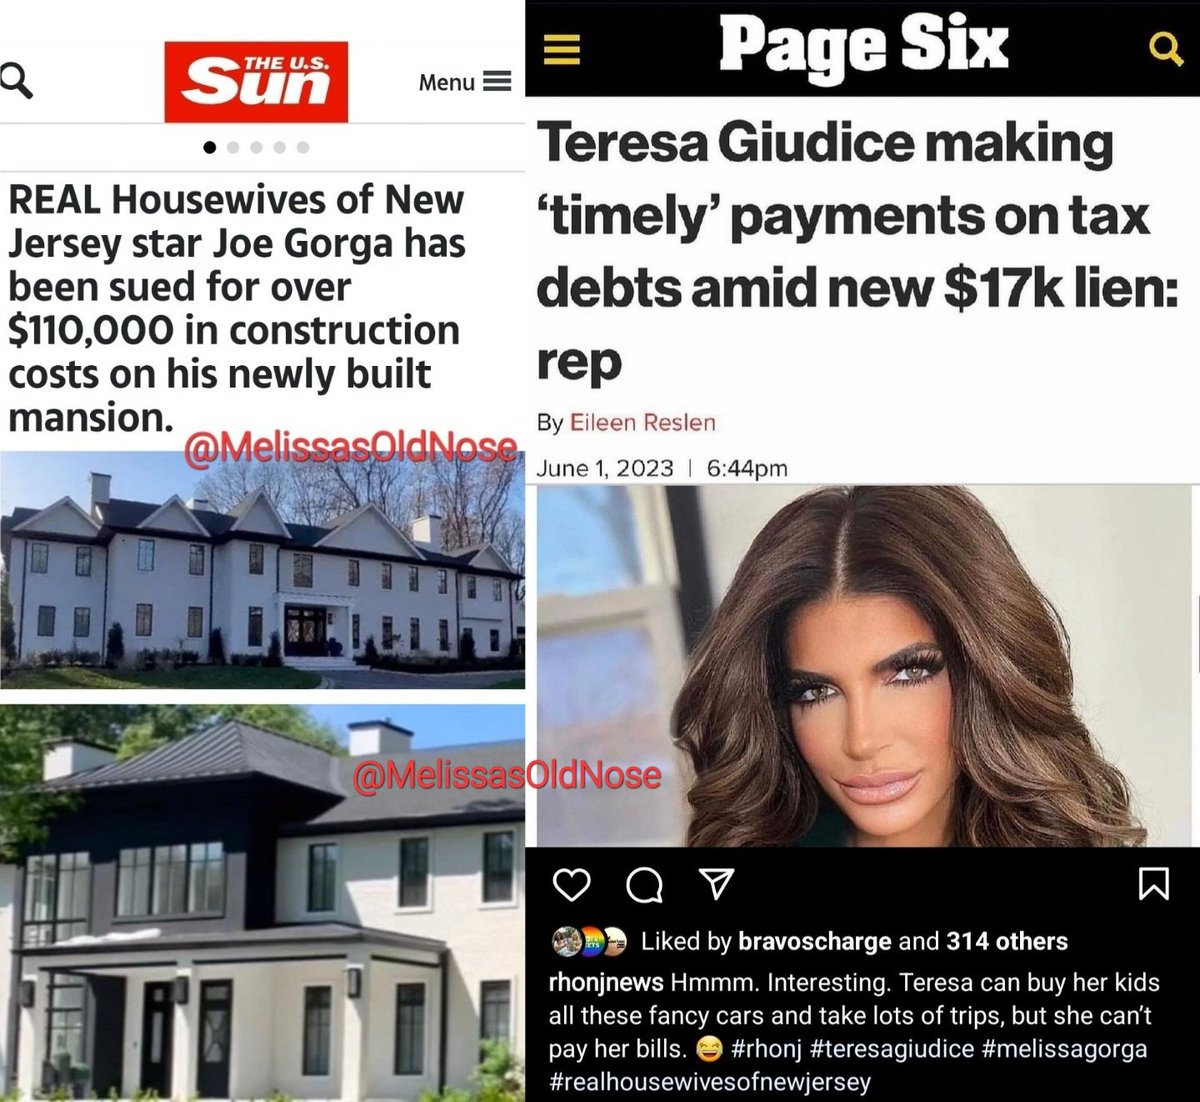 The same people who rag about Teresa traveling while paying her tax lien are the same ones who will praise the Gorgas redone new home while not paying their lawsuits! #RHONJ